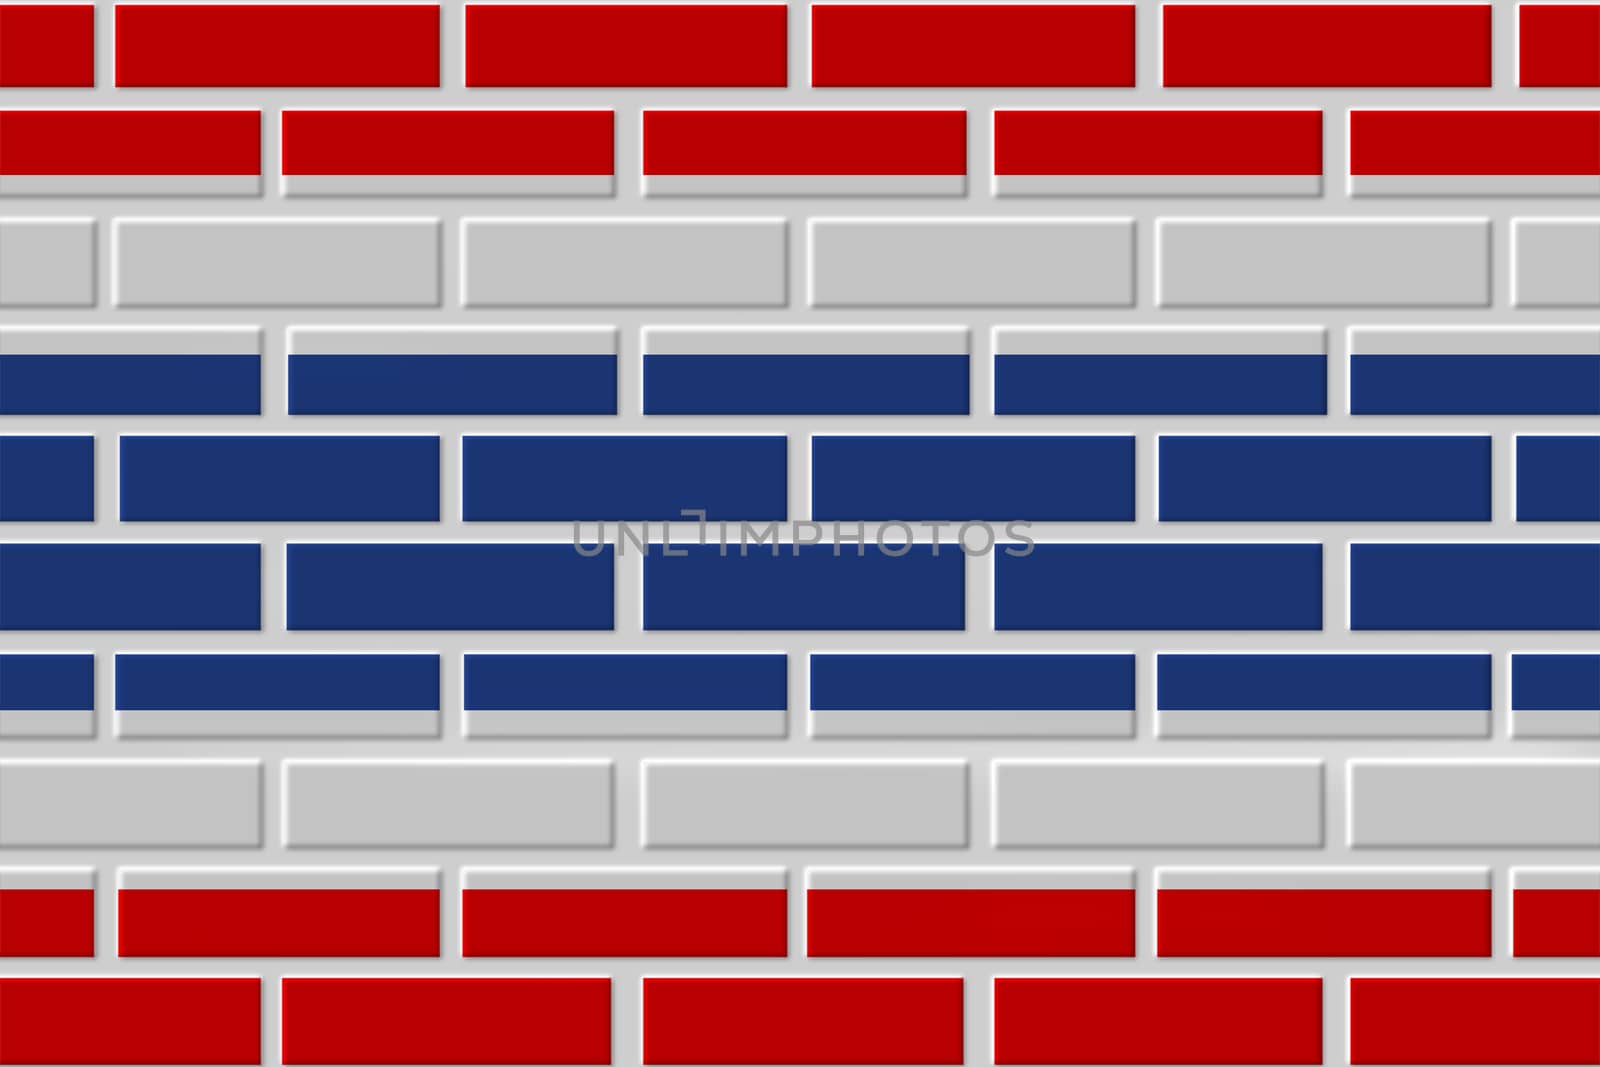 Thailand brick flag illustration by Visual-Content